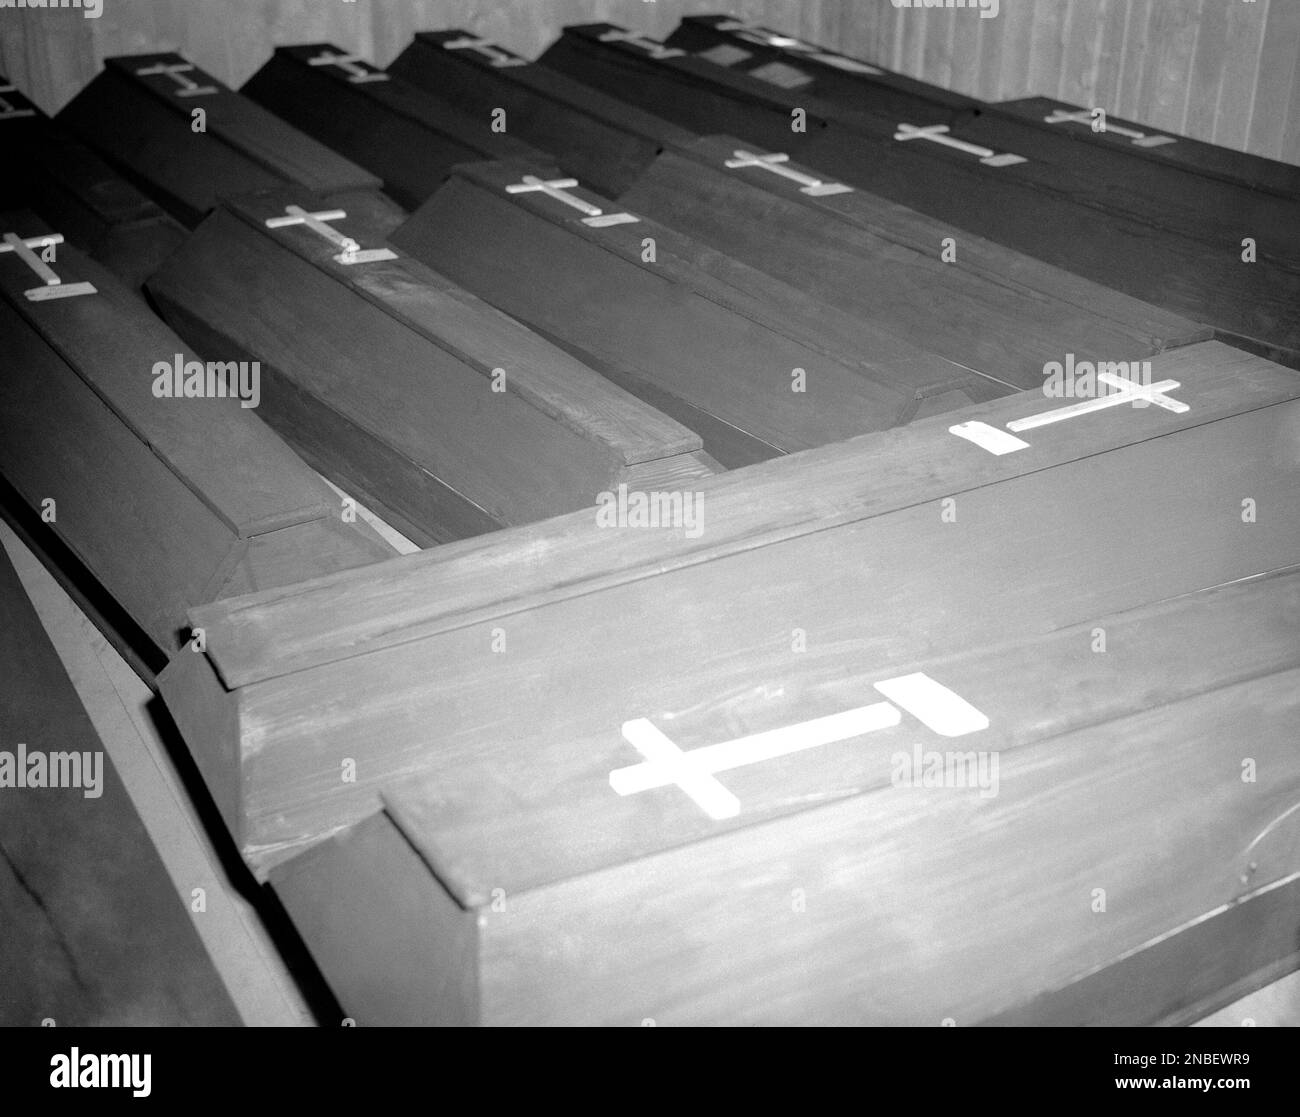 These coffins contain bodies of Nazis executed at Landsberg, Germany on May 28, 1946, in the first day of a two-day mass execution of 28 persons convicted last December of killing thousands of innocent victims by medical experiments, unleashing of hungry dogs, sadistic tortures, and malnutrition at Dachau concentration camp. Fourteen executions were carried out each day. (AP Photo/Robert Clover) Foto Stock